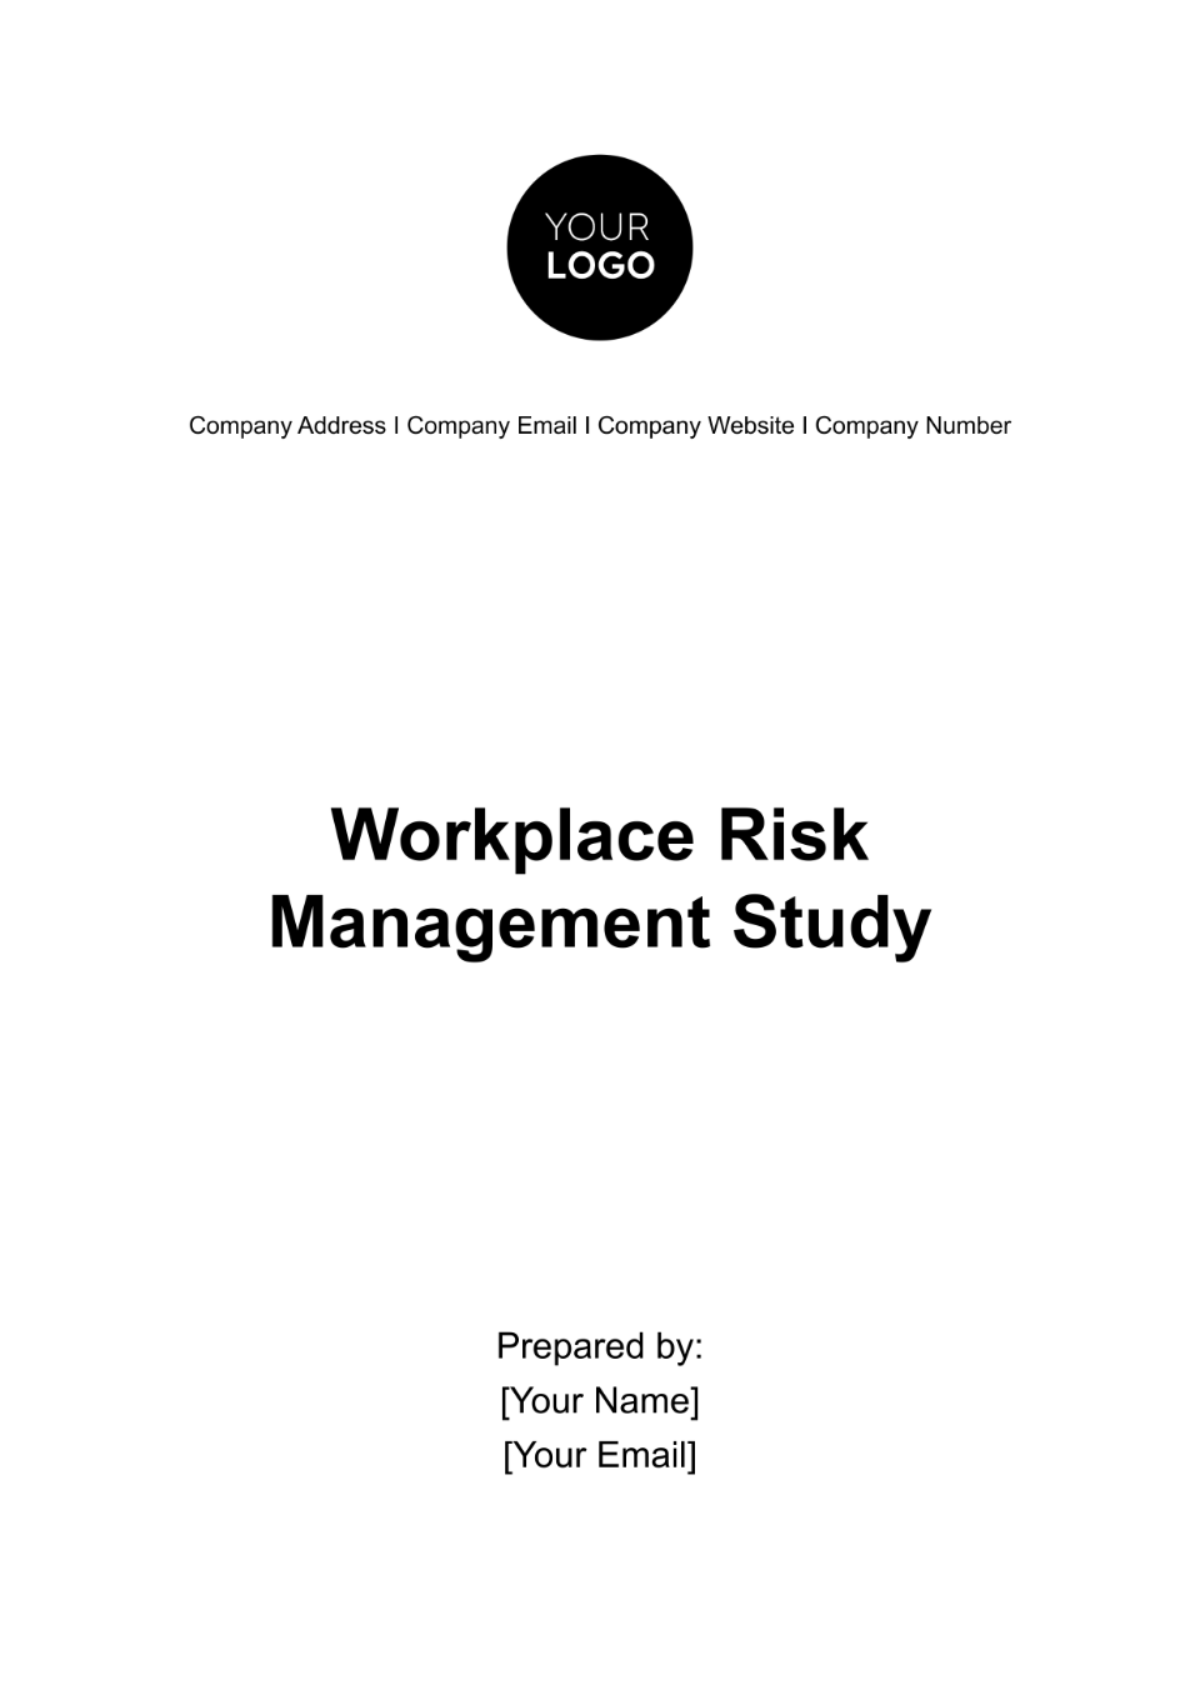 Workplace Risk Management Study Template